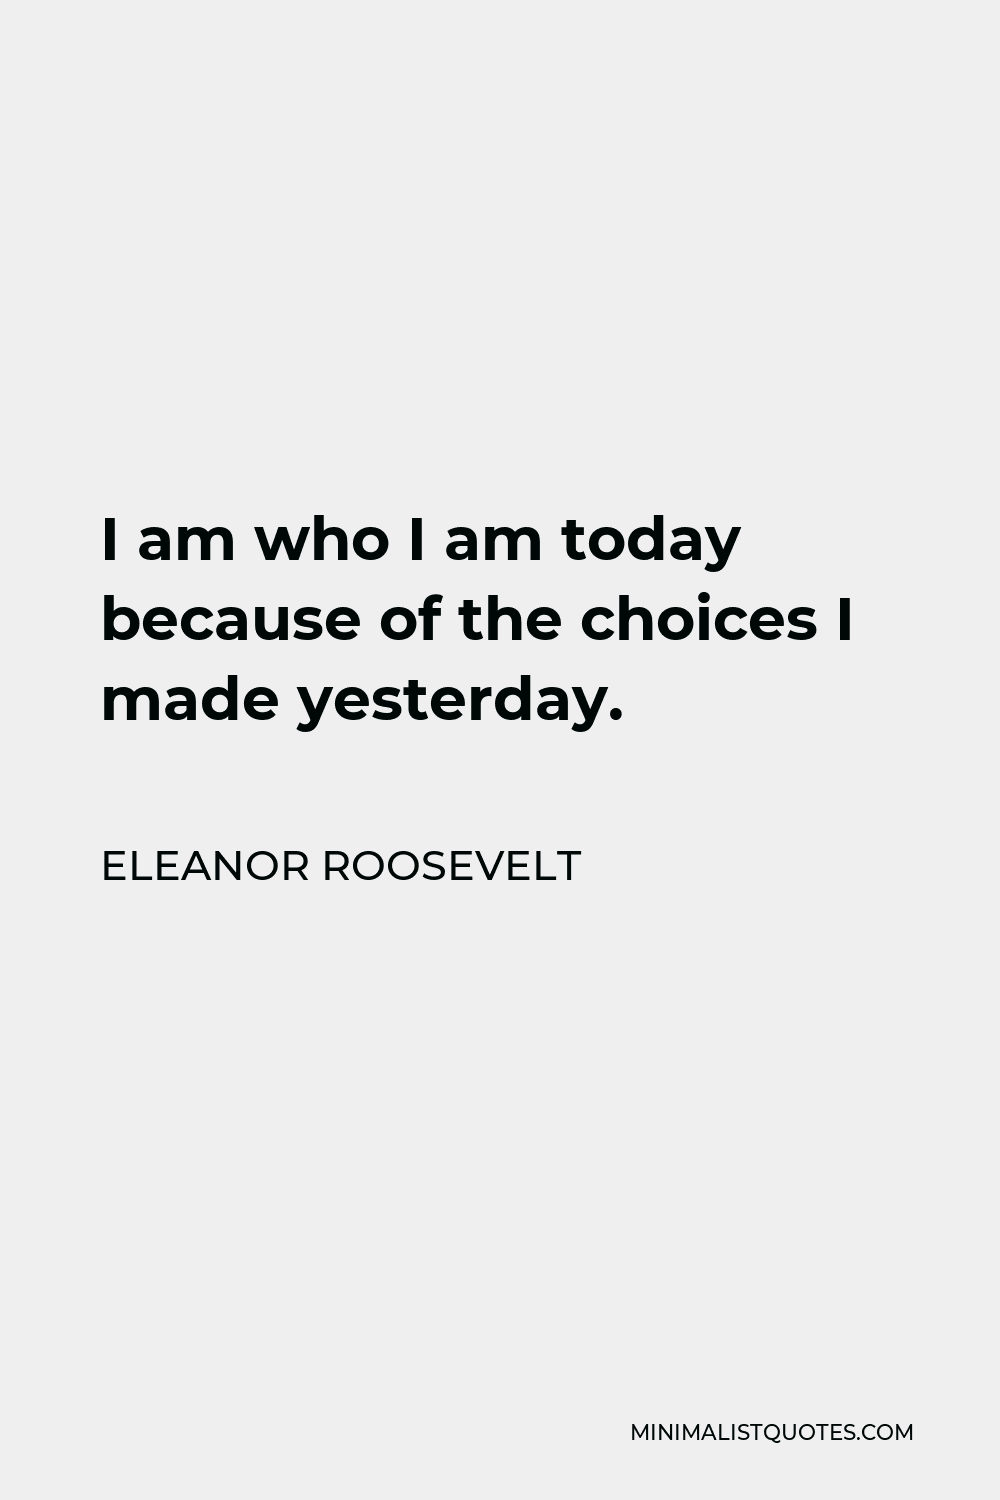 Eleanor Roosevelt Quote - I am who I am today because of the choices I made yesterday.